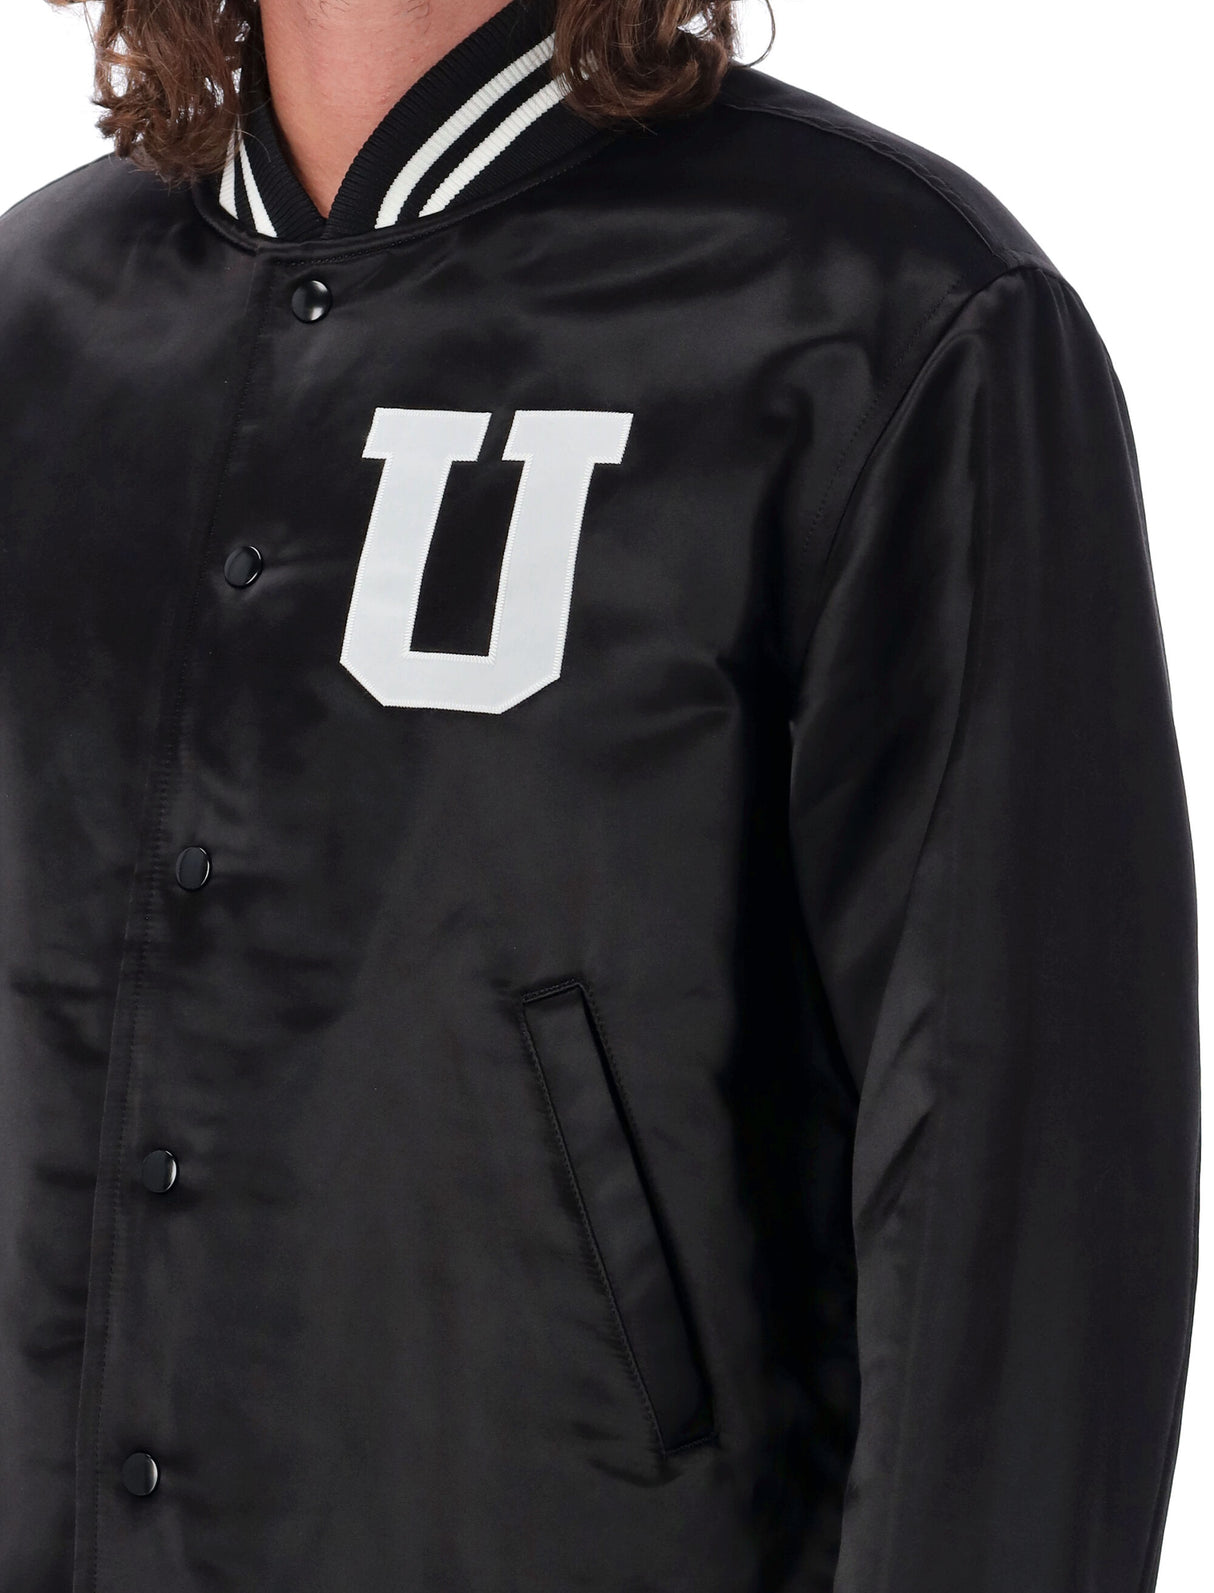 UNDERCOVER Black Varsity Jacket with Embroidered Details and Satin Finish